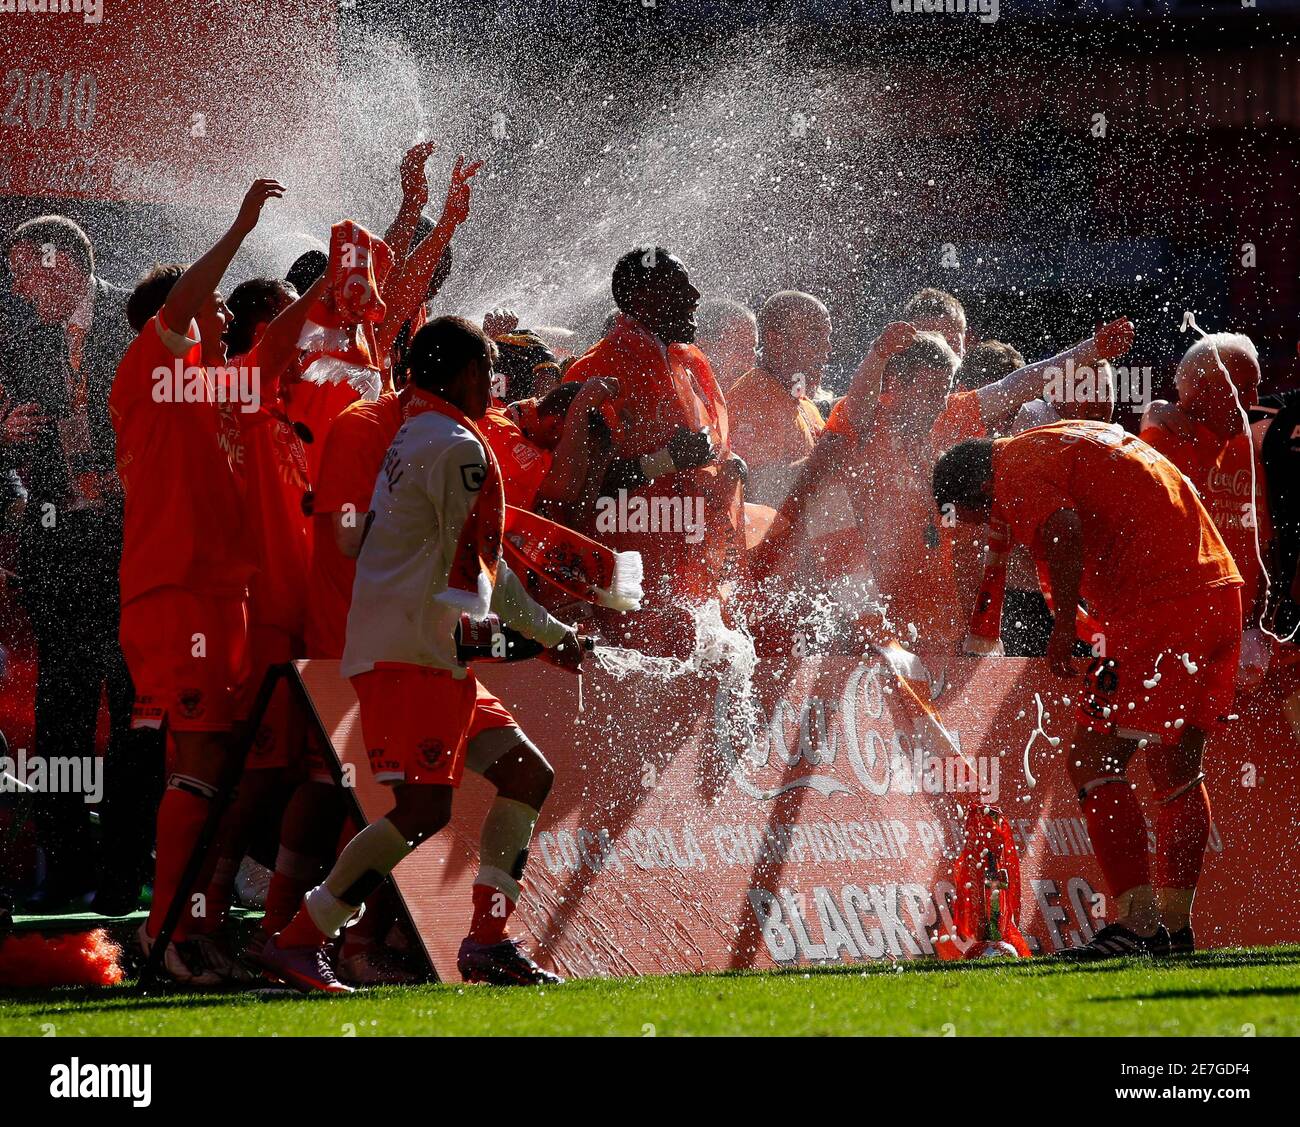 Blackpool's players celebrate after their English Championship play-off final soccer match victory over Cardiff City at Wembley Stadium in London May 22, 2010. Blackpool were promoted to the Premier League on Saturday after winning the Championship (division two) playoff final 3-2 against Cardiff City at Wembley stadium.  REUTERS/ Eddie Keogh (BRITAIN-Tags: - Tags: SPORT SOCCER IMAGES OF THE DAY) Stock Photo